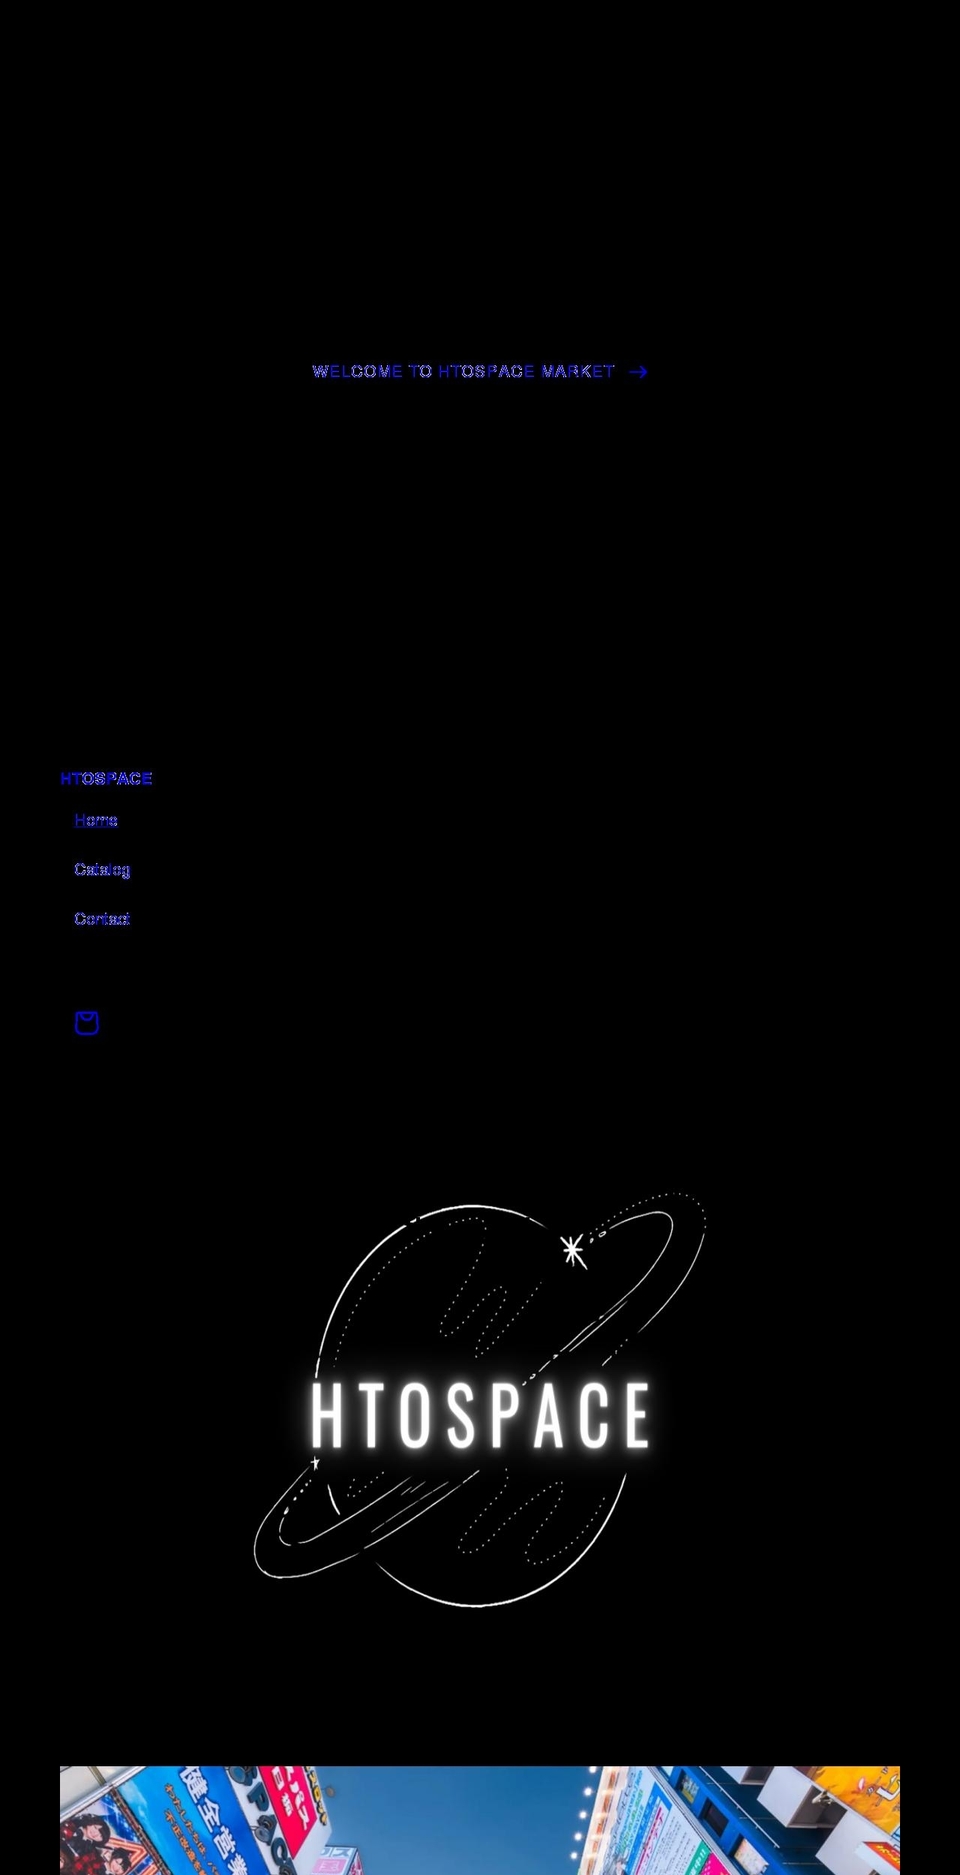 space Shopify theme site example htospace.com